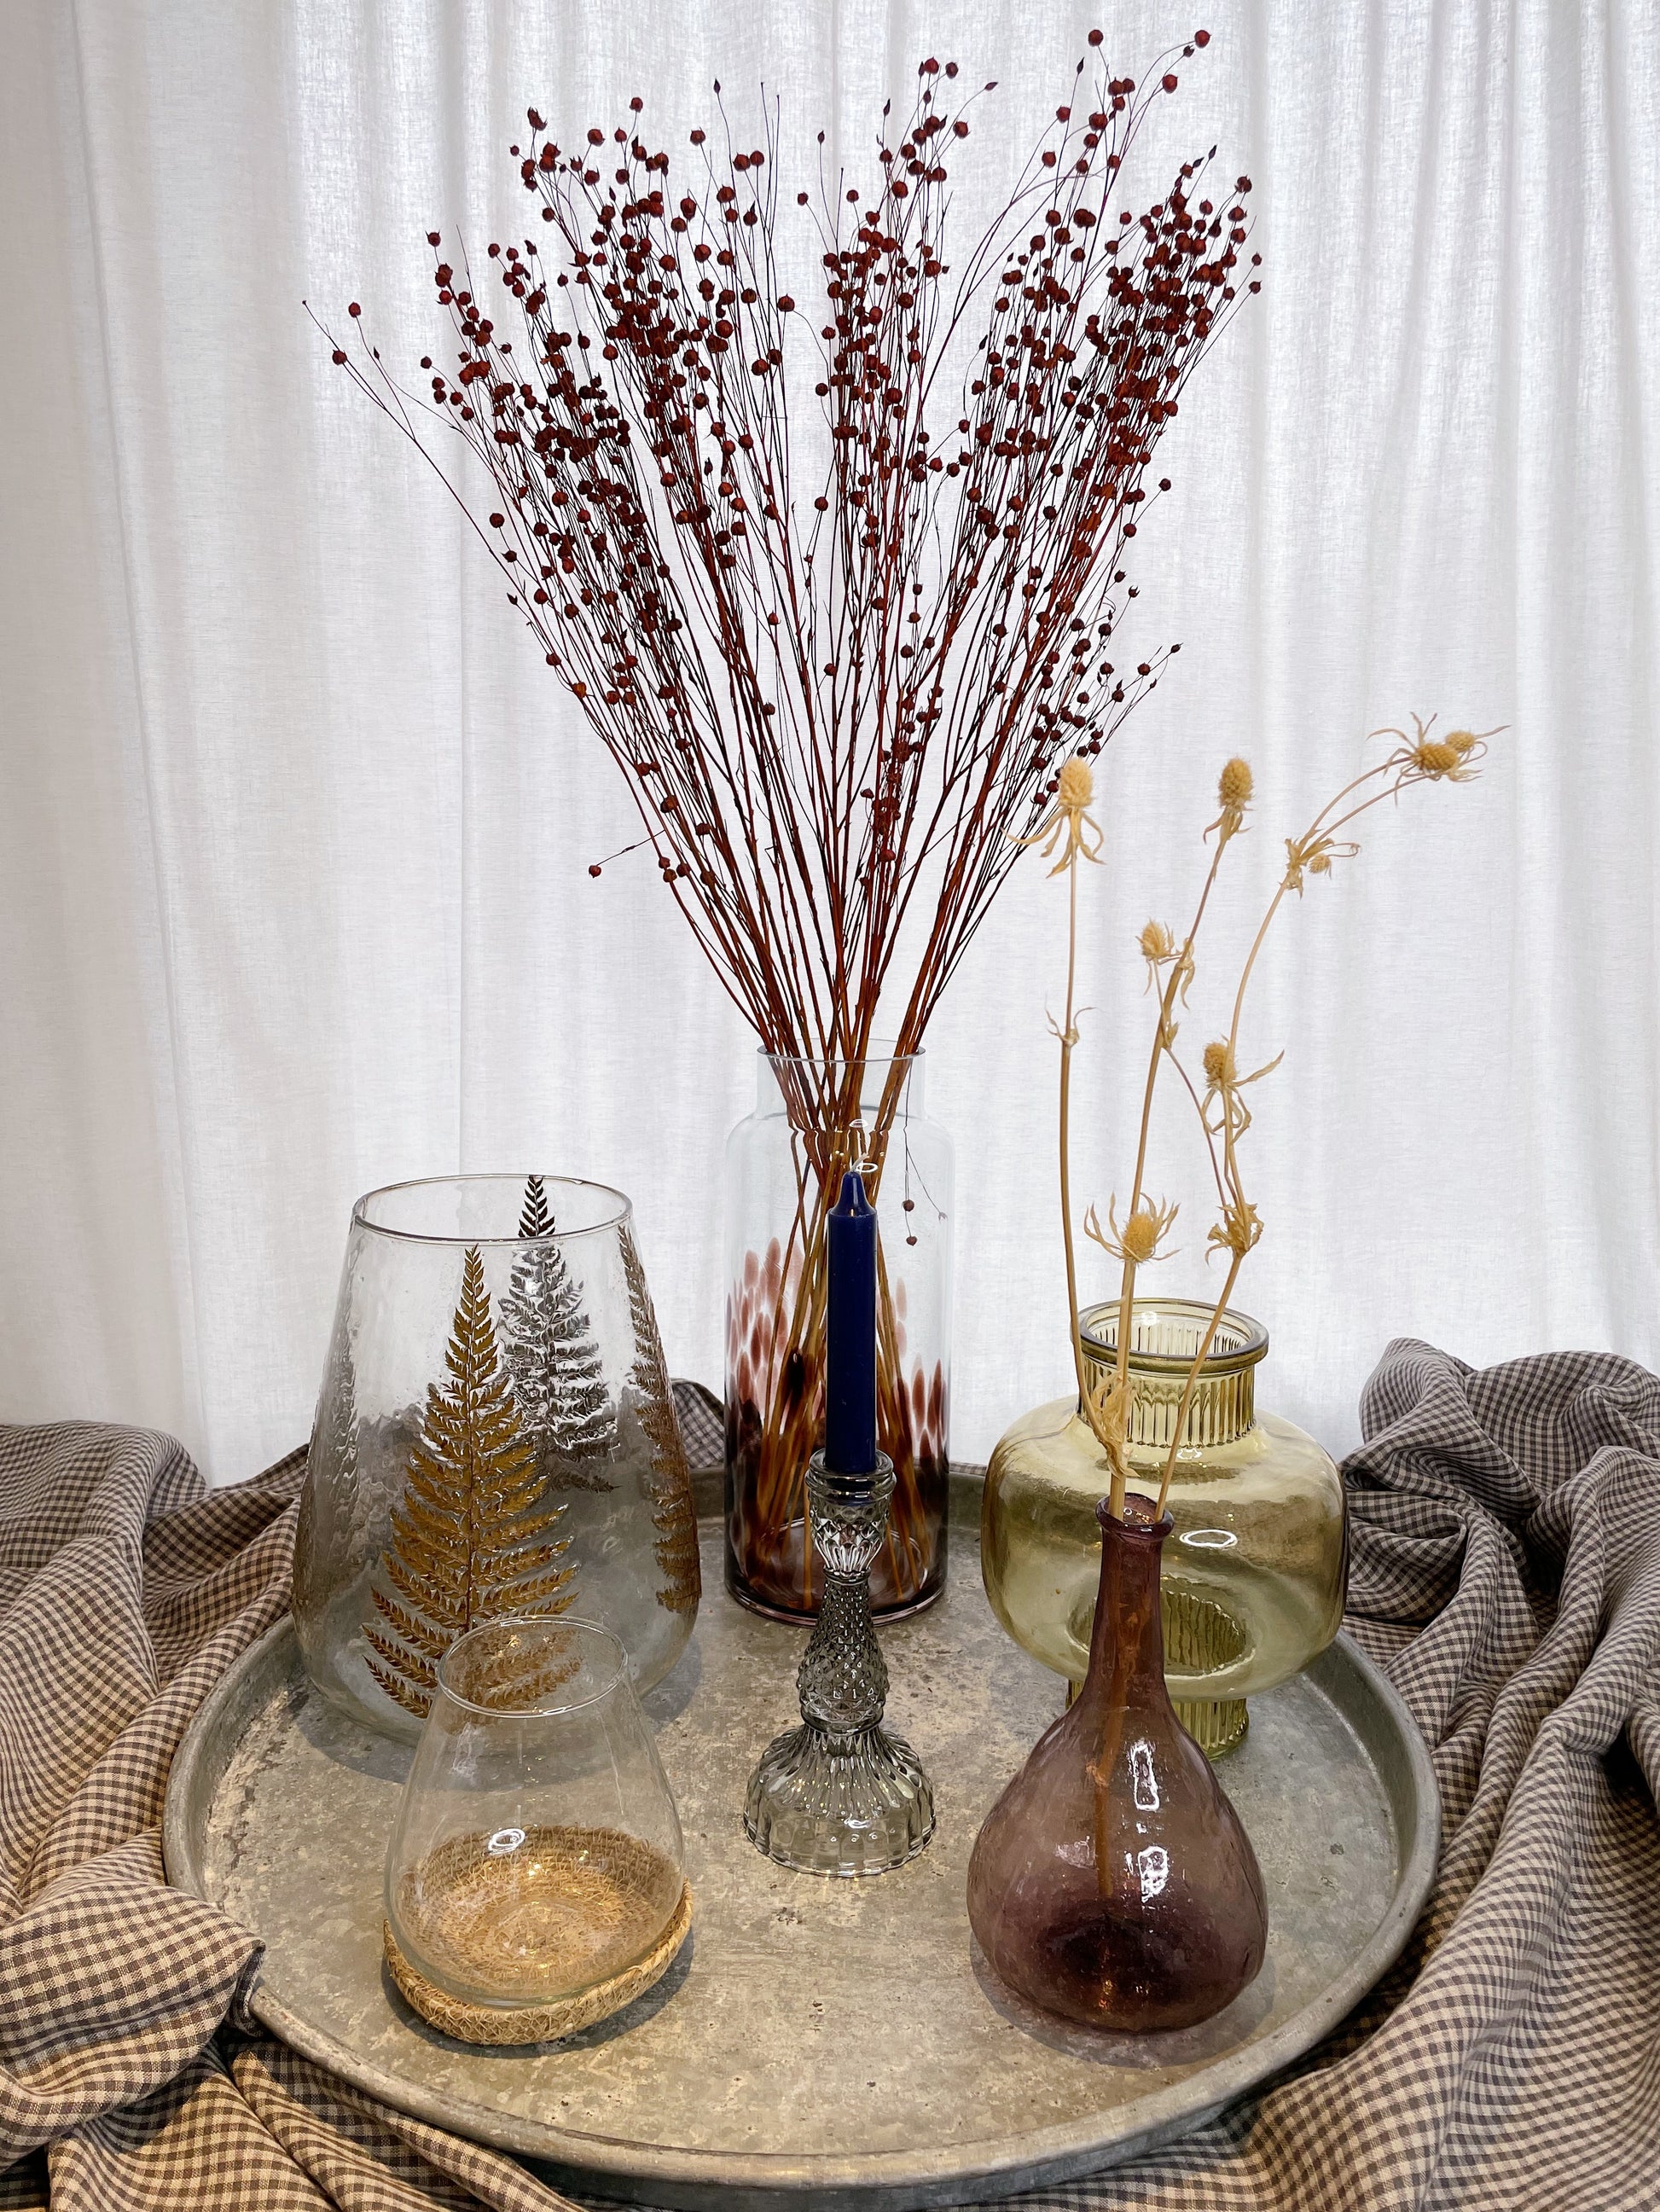 A selection of glass vases and candlesticks/votives on a metal tray, on top of a check table cloth